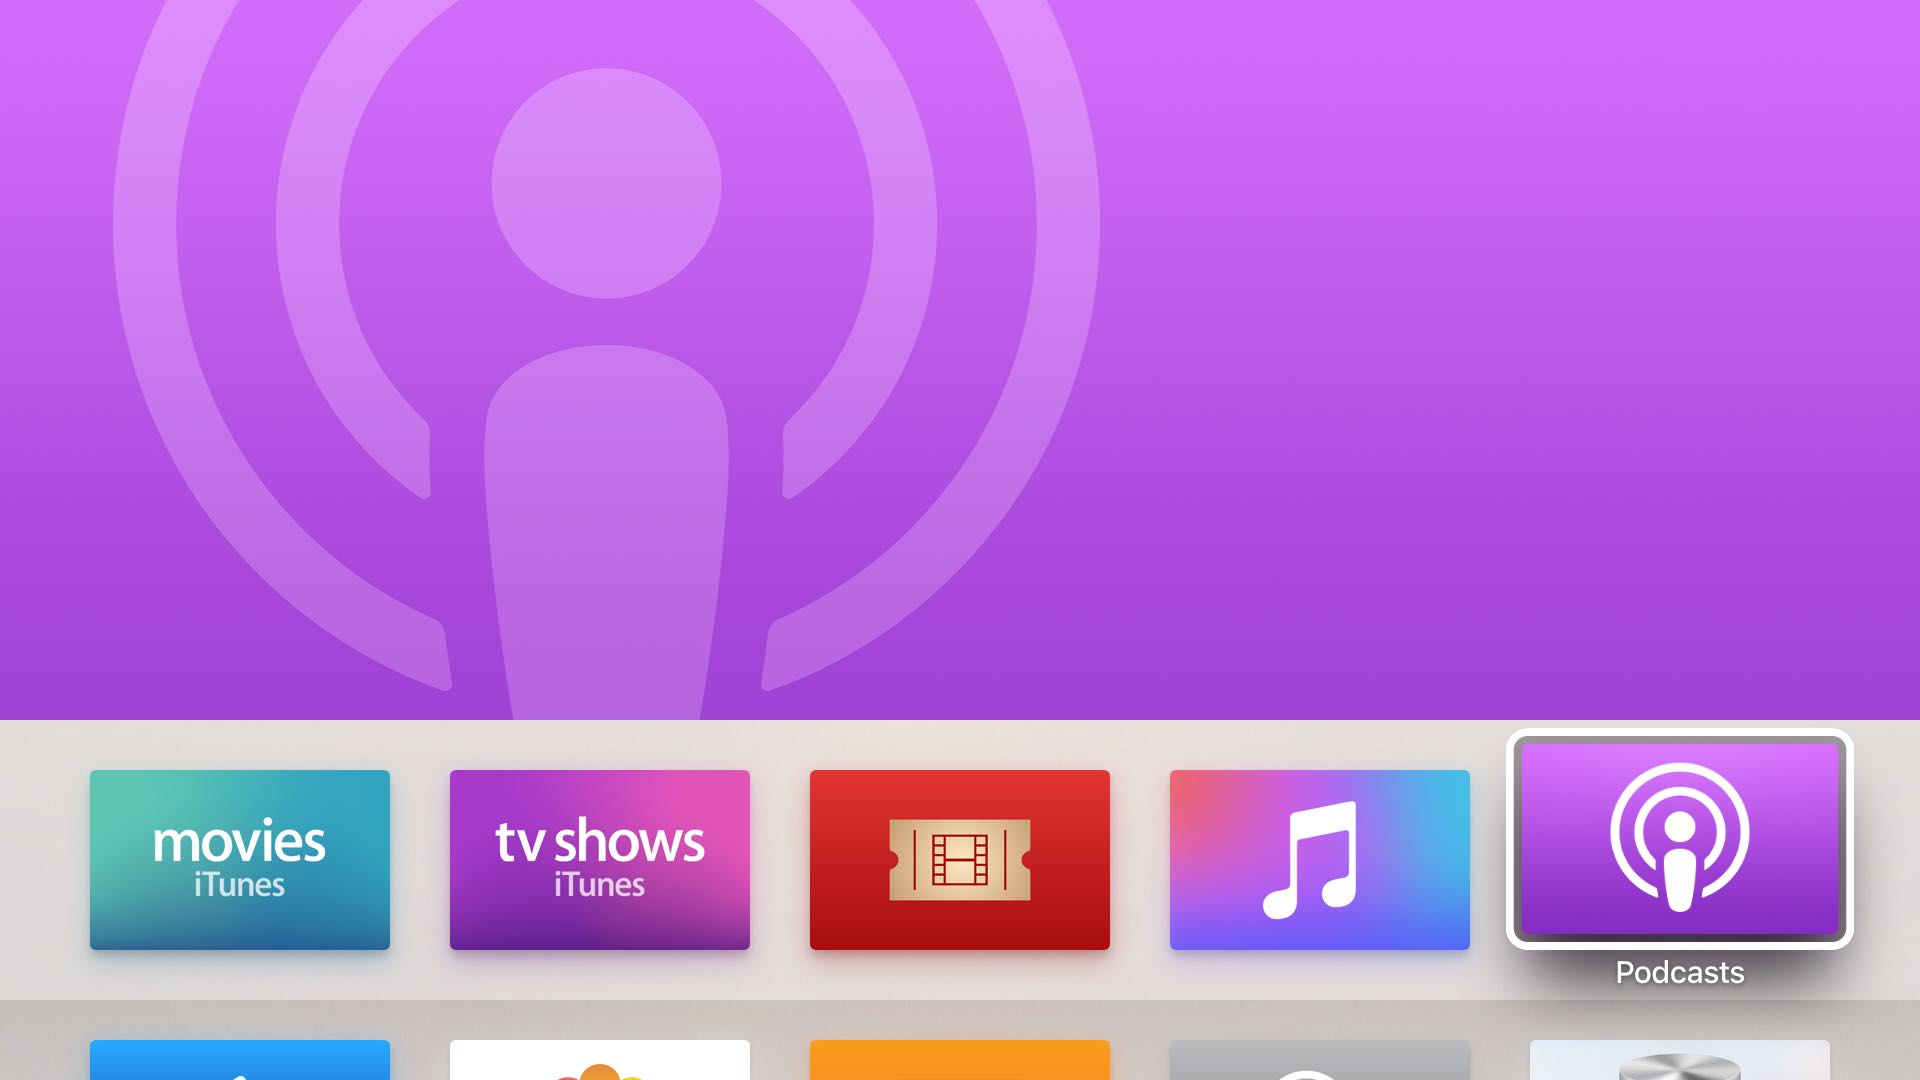 How to disable explicit music and podcasts on your Apple TV